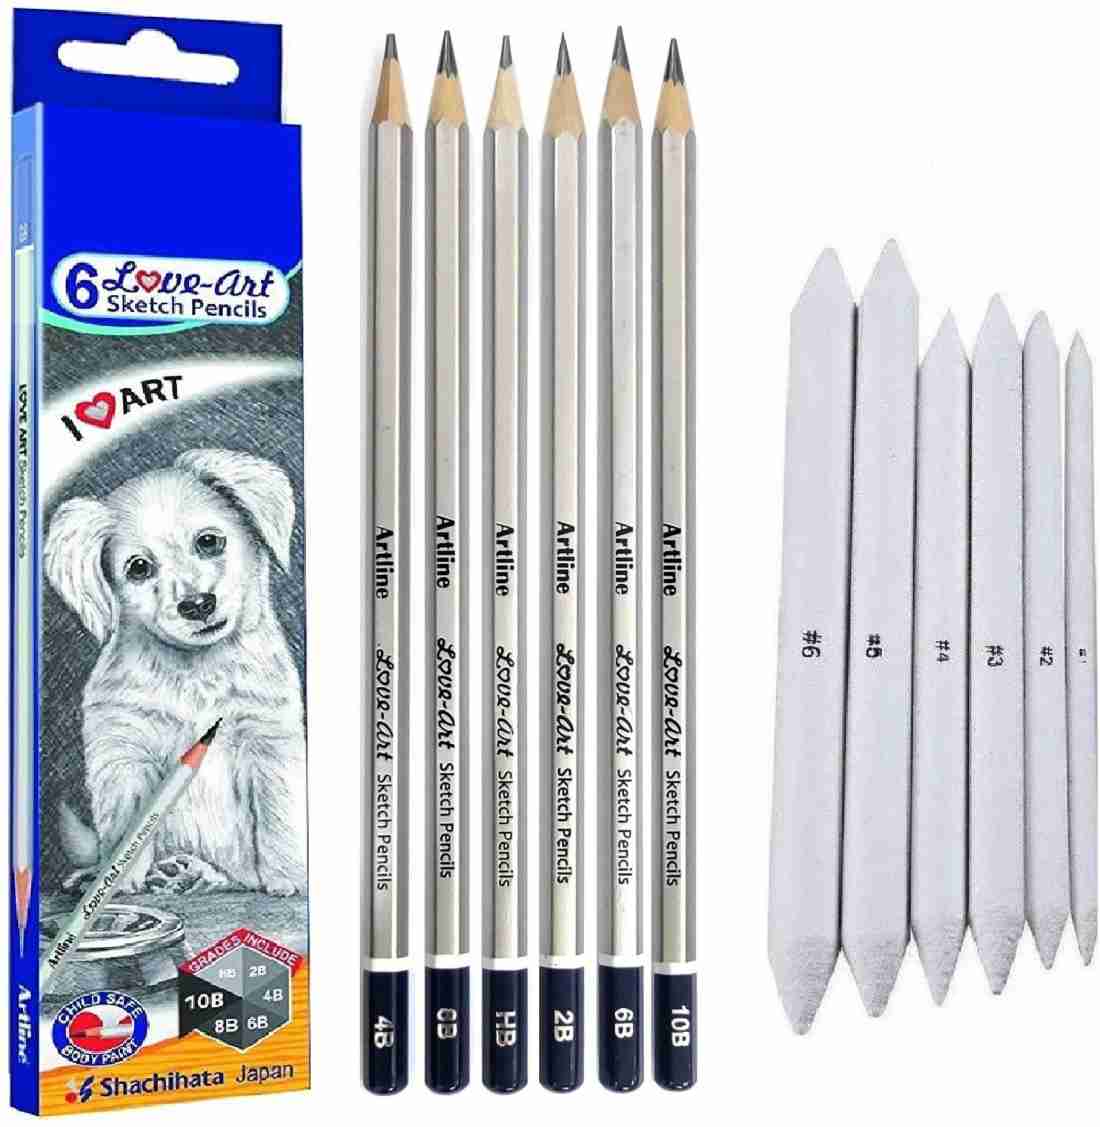 mixale Camlin High Quality Drawing Pencil With Paper  Blending Stumps - Drawing Art Set